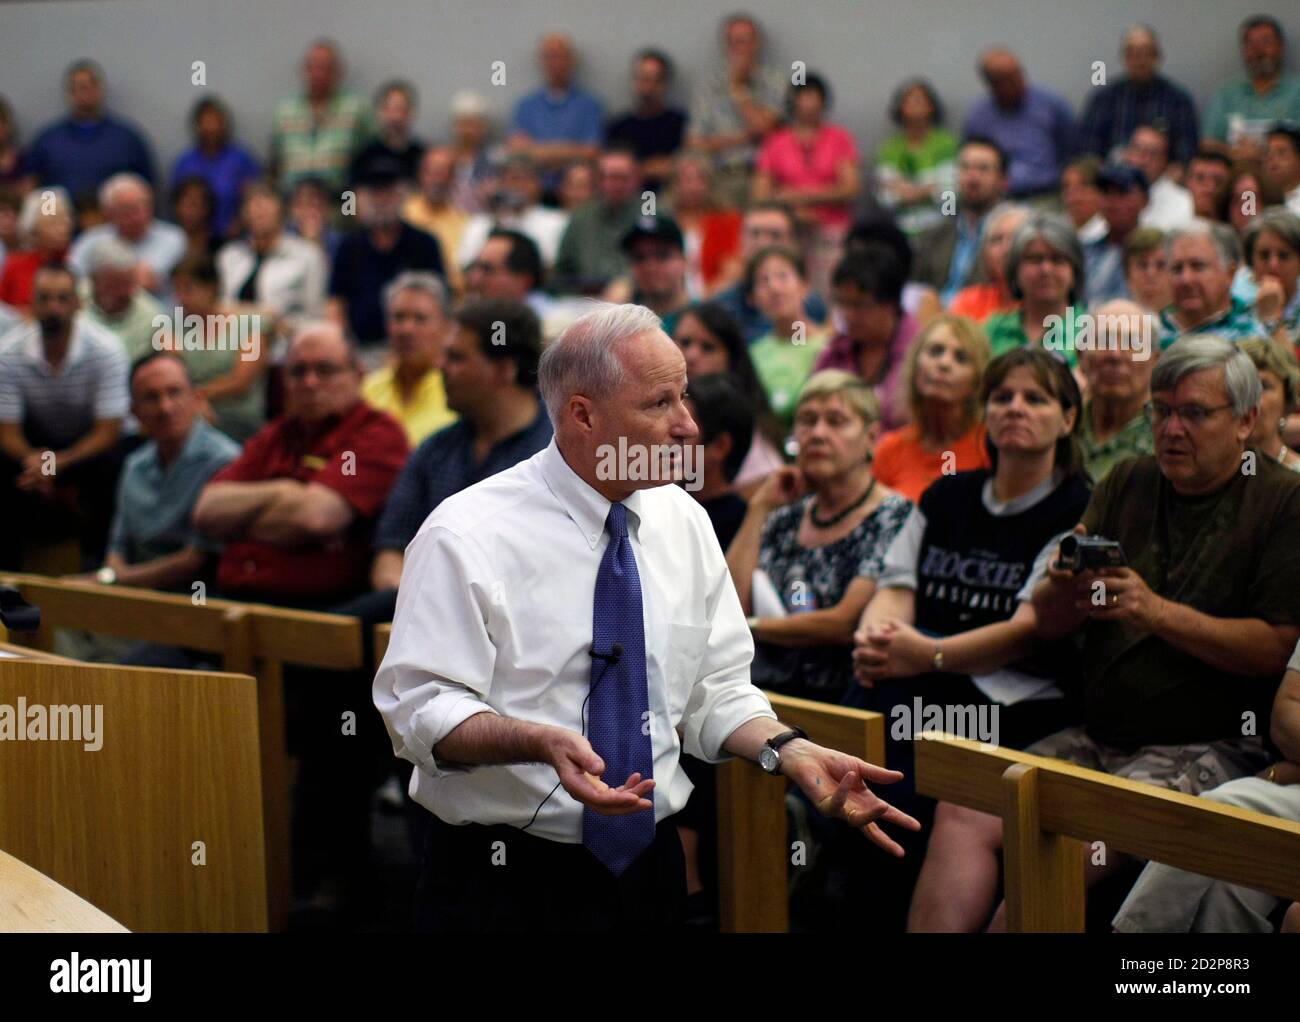 People listen at a town hall meeting on healthcare reform hosted by Rep. Mike Coffman (R-CO) in Littleton, Colorado August 12, 2009. REUTERS/Rick Wilking (UNITED STATES POLITICS HEALTH) Stock Photo